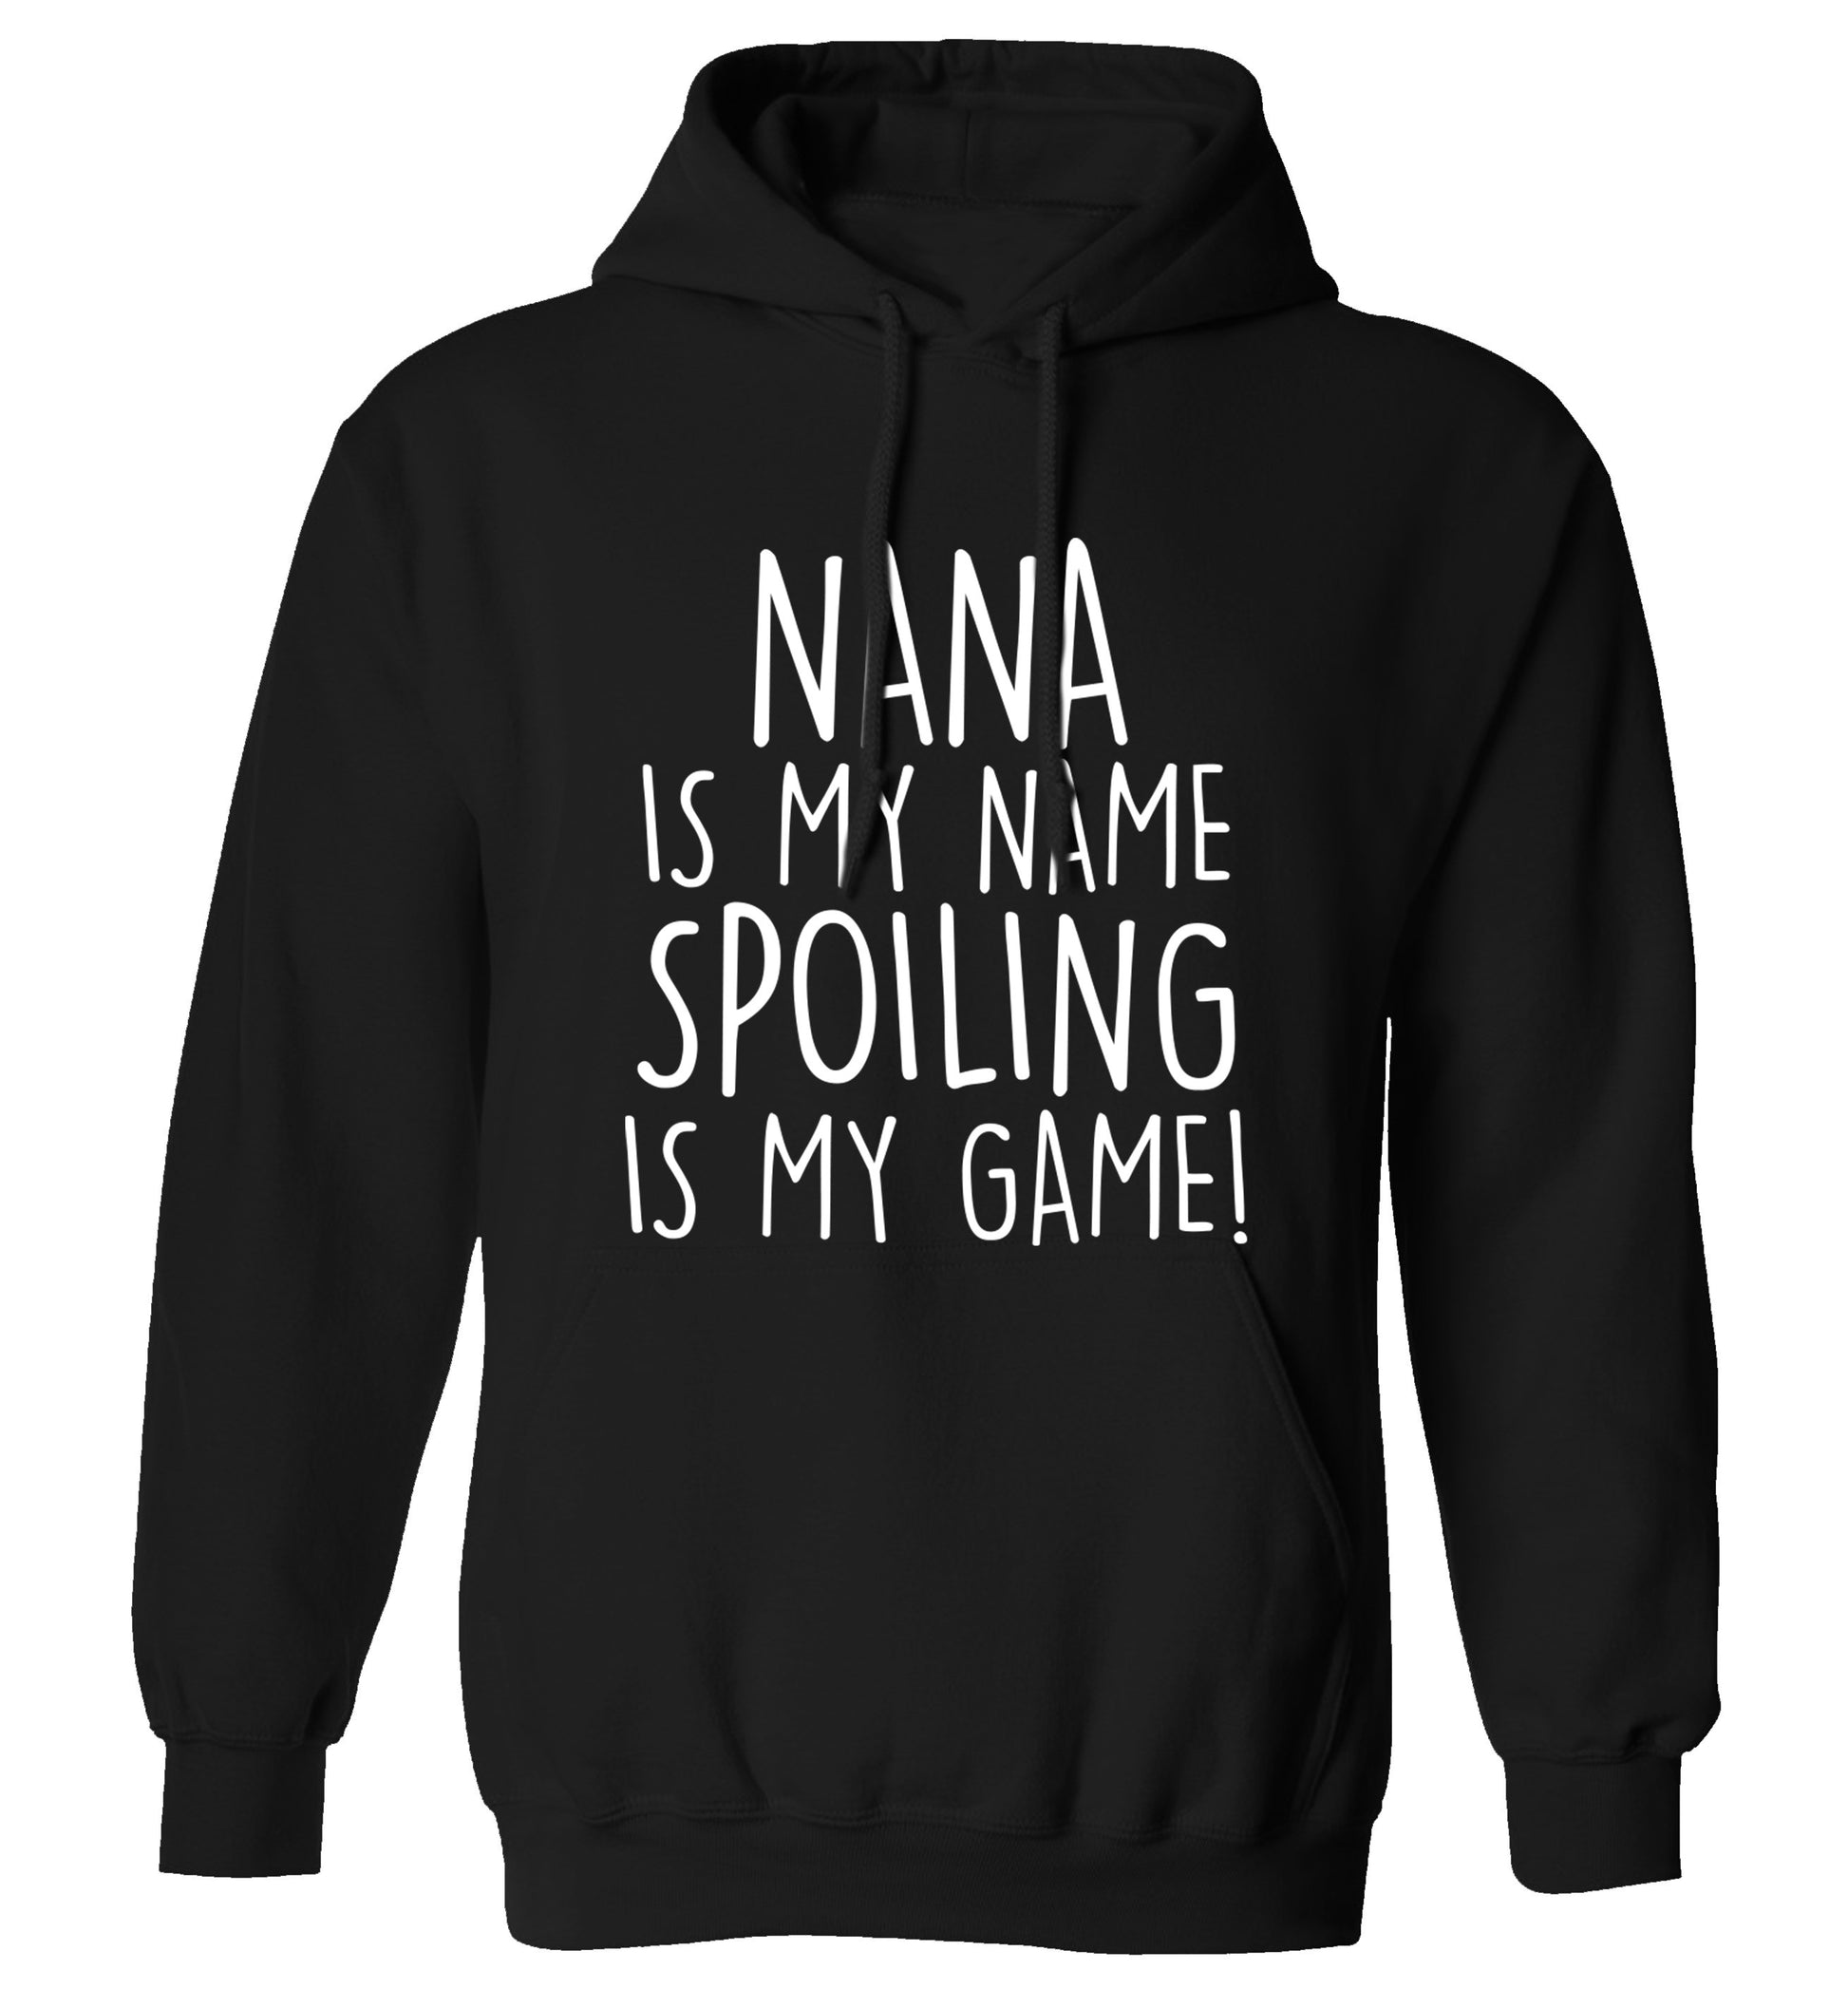 Nana is my name, spoiling is my game adults unisex black hoodie 2XL